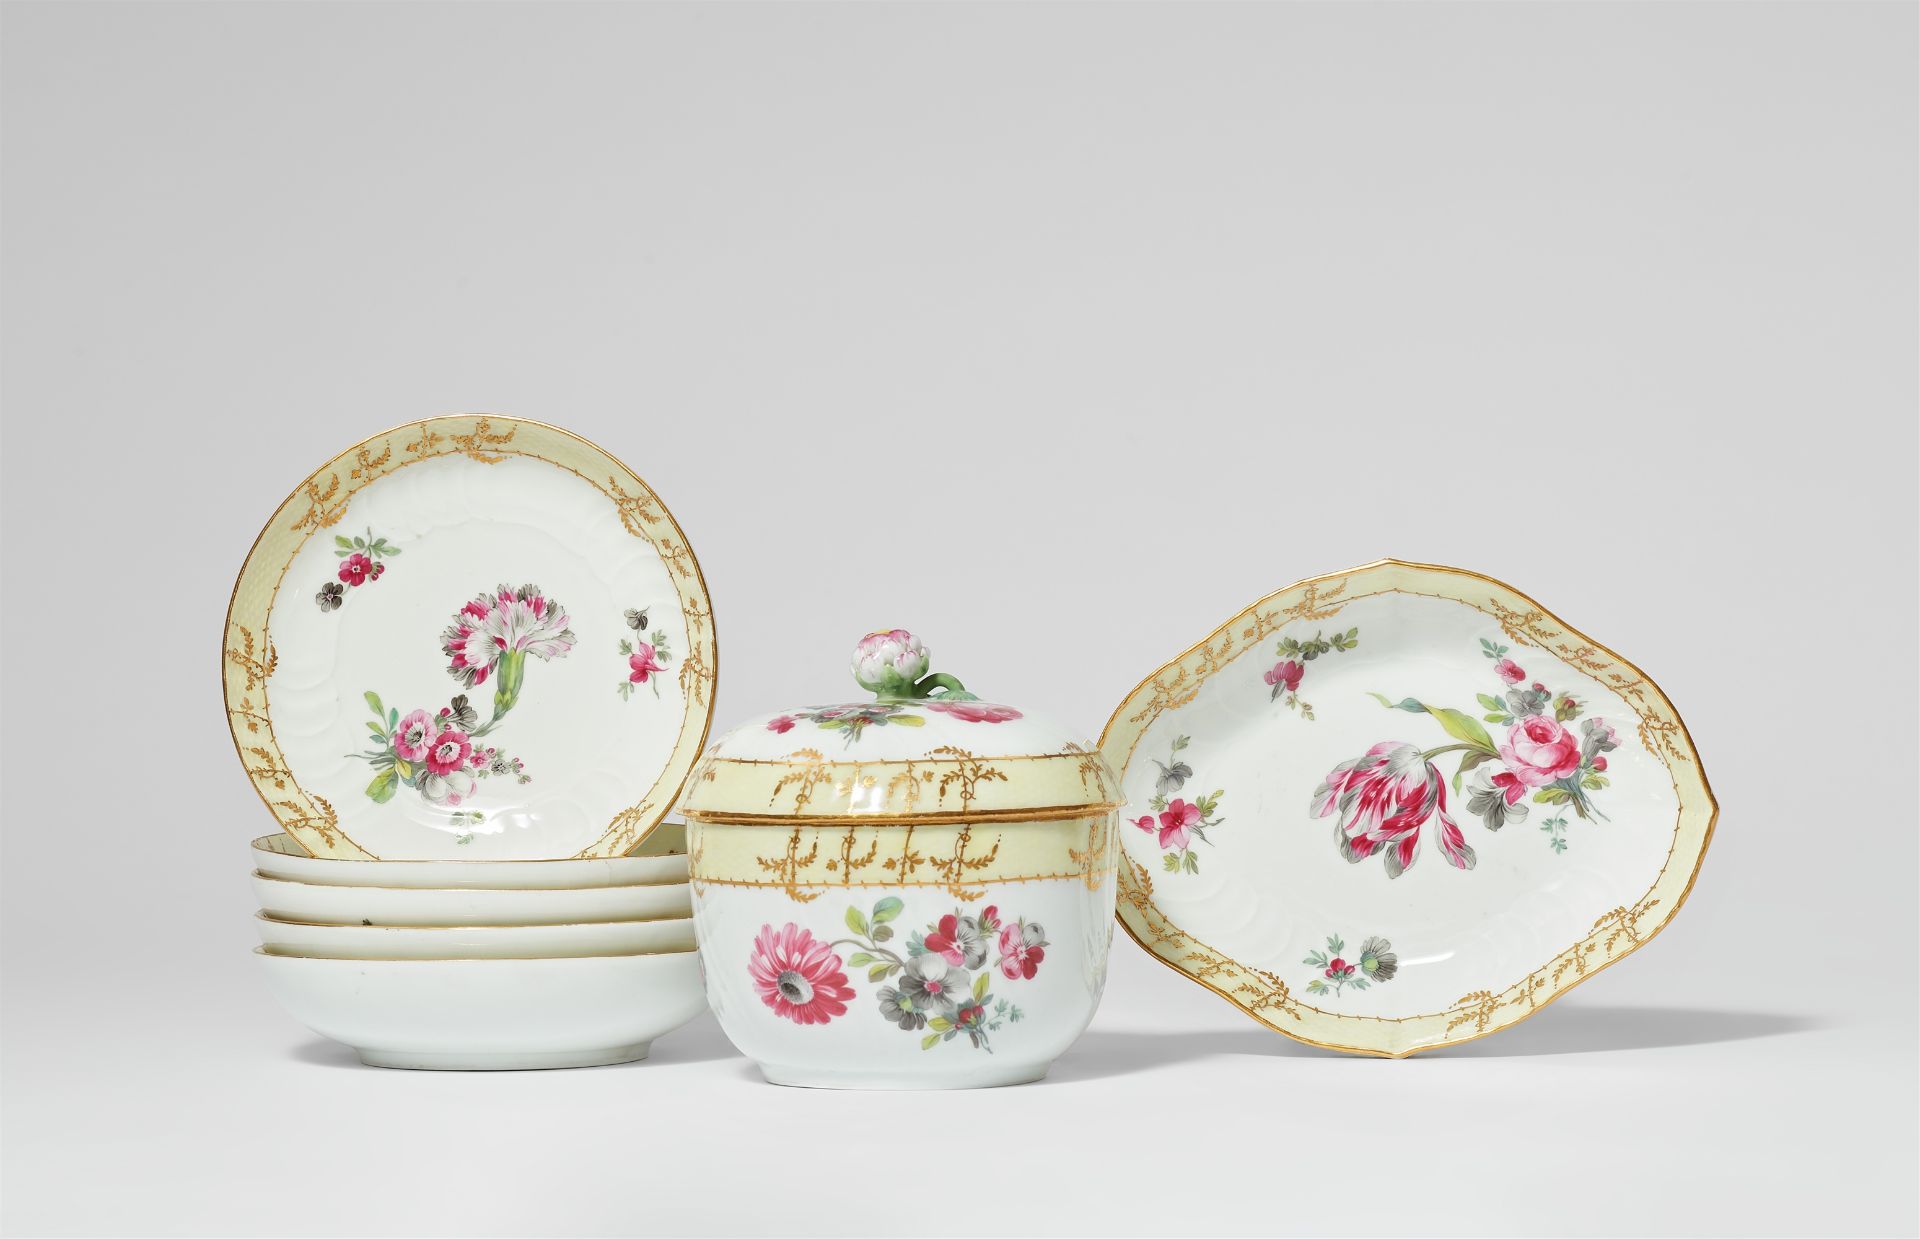 Seven Berlin KPM porcelain items from a coffee service with tri-coloured flowers